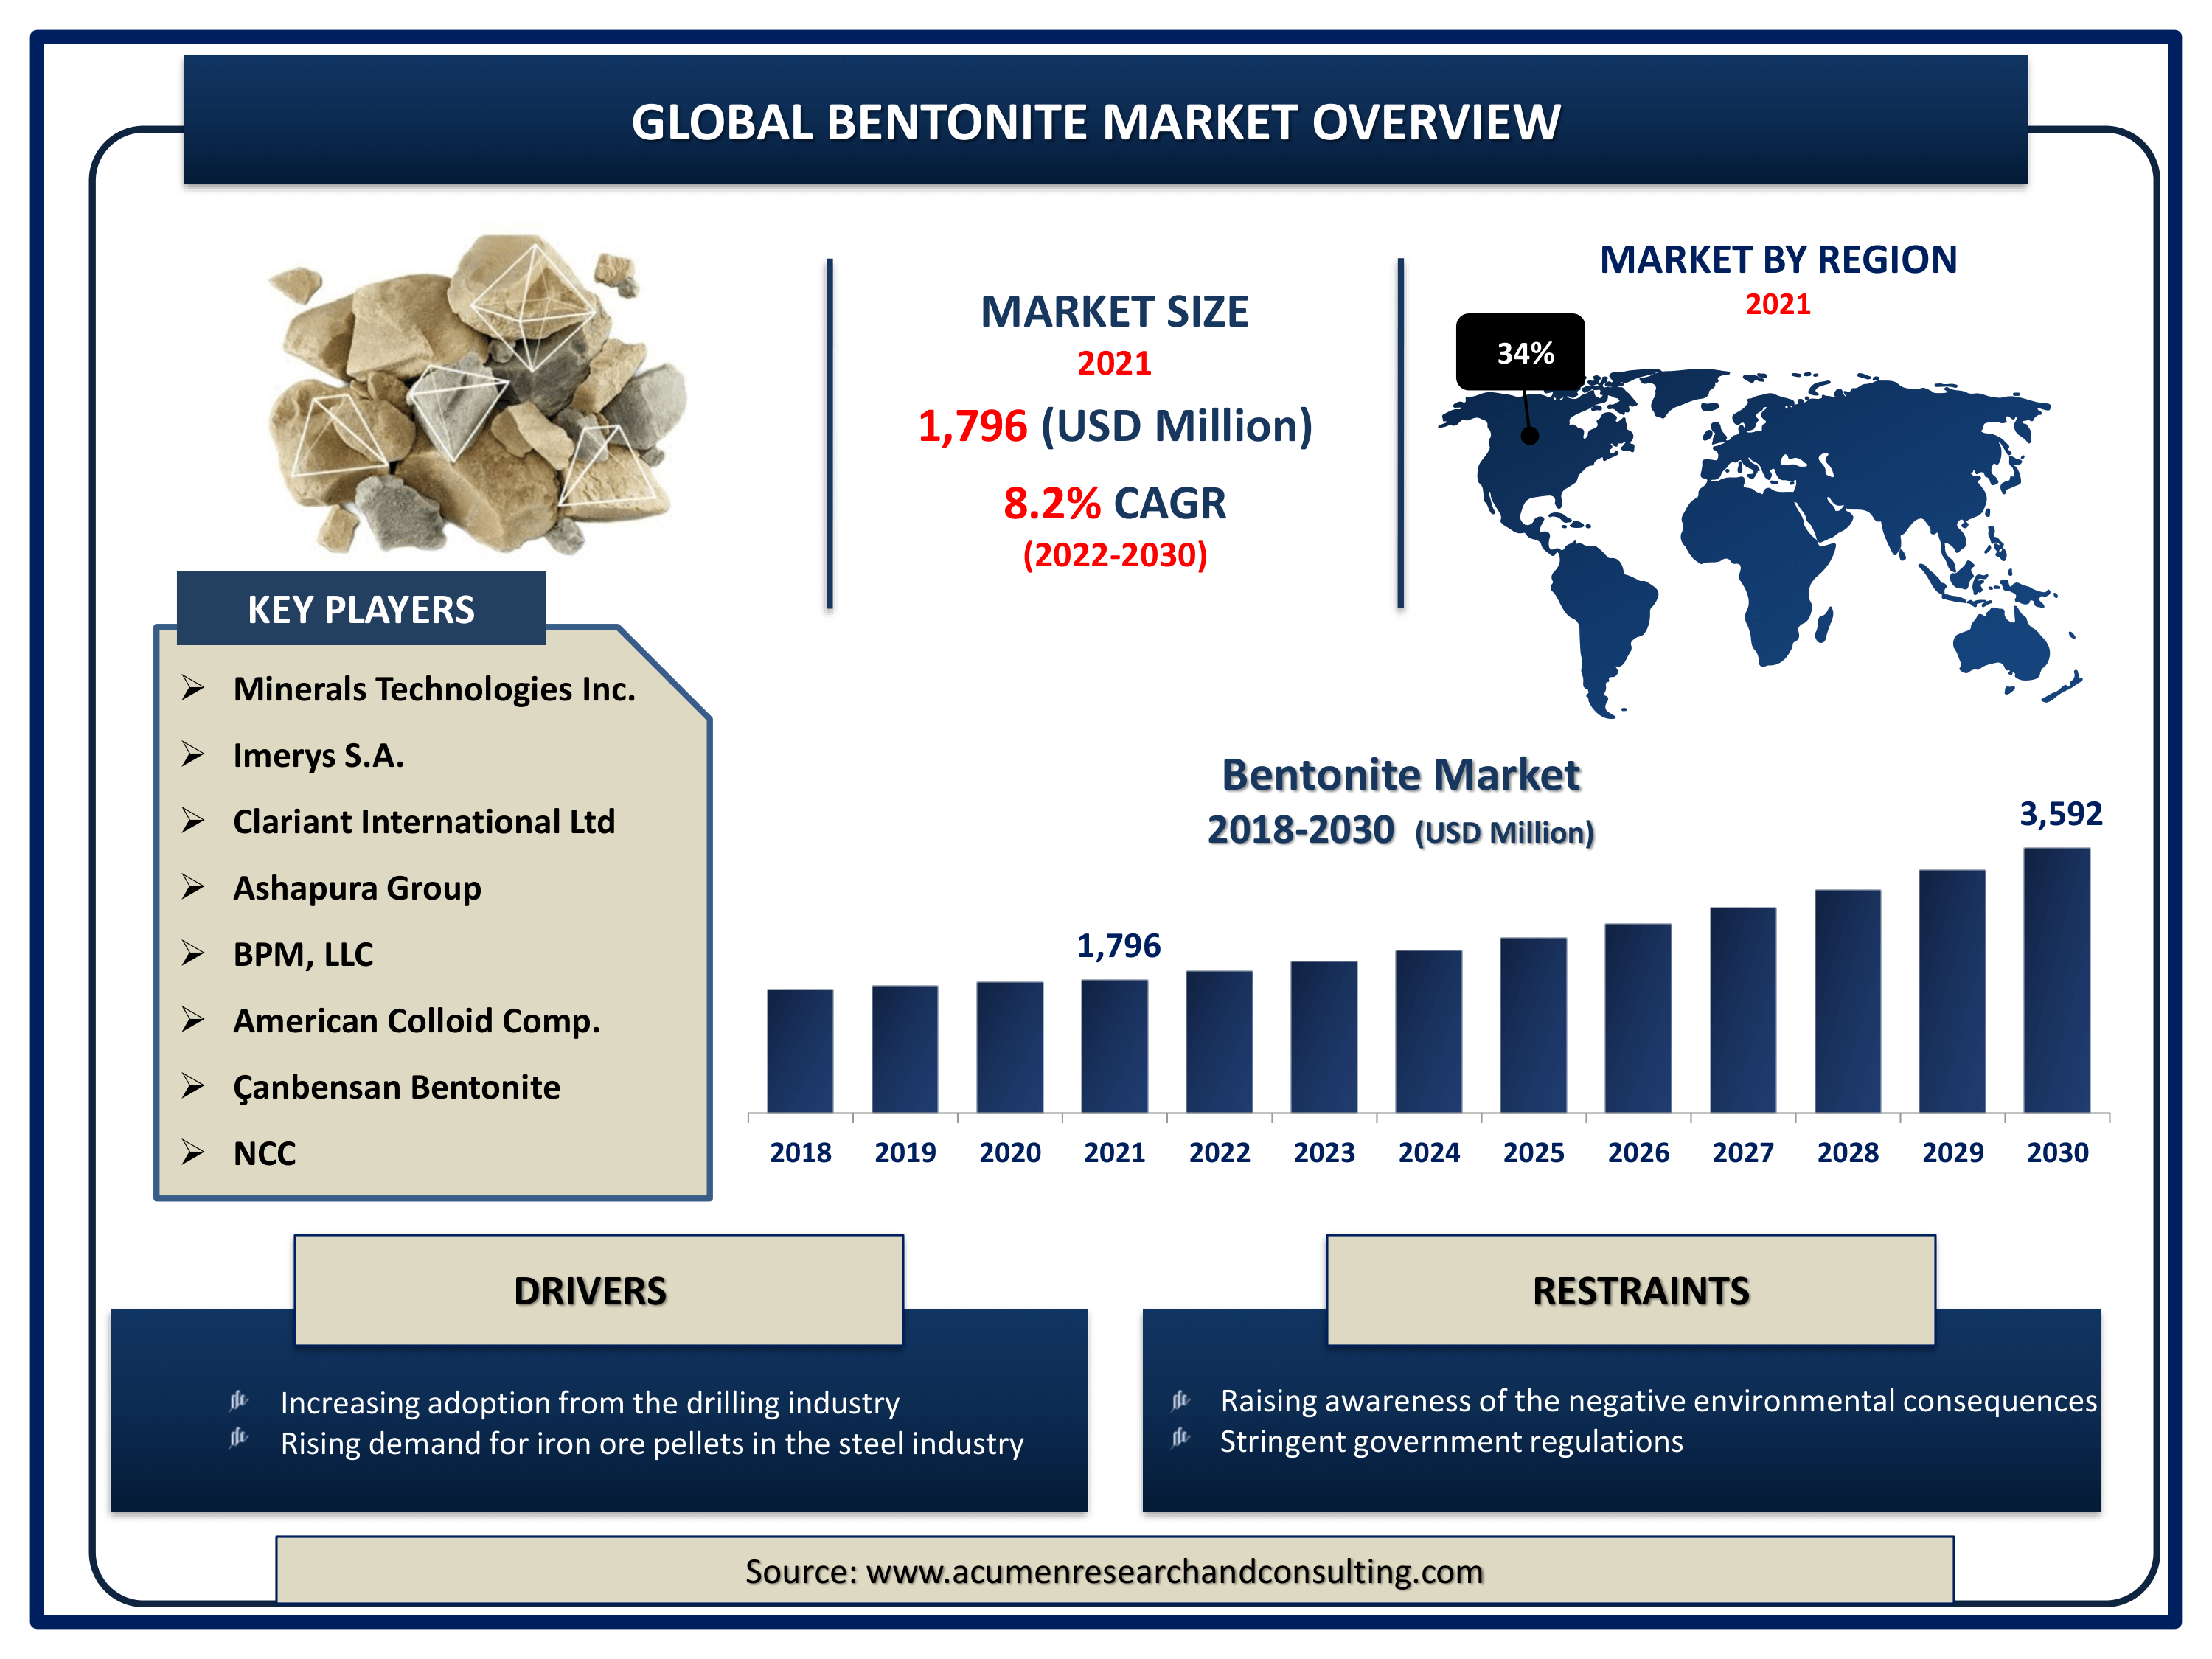 Global bentonite market revenue is estimated to expand by USD 3,592 million by 2030, with a 8.2% CAGR from 2022 to 2030.